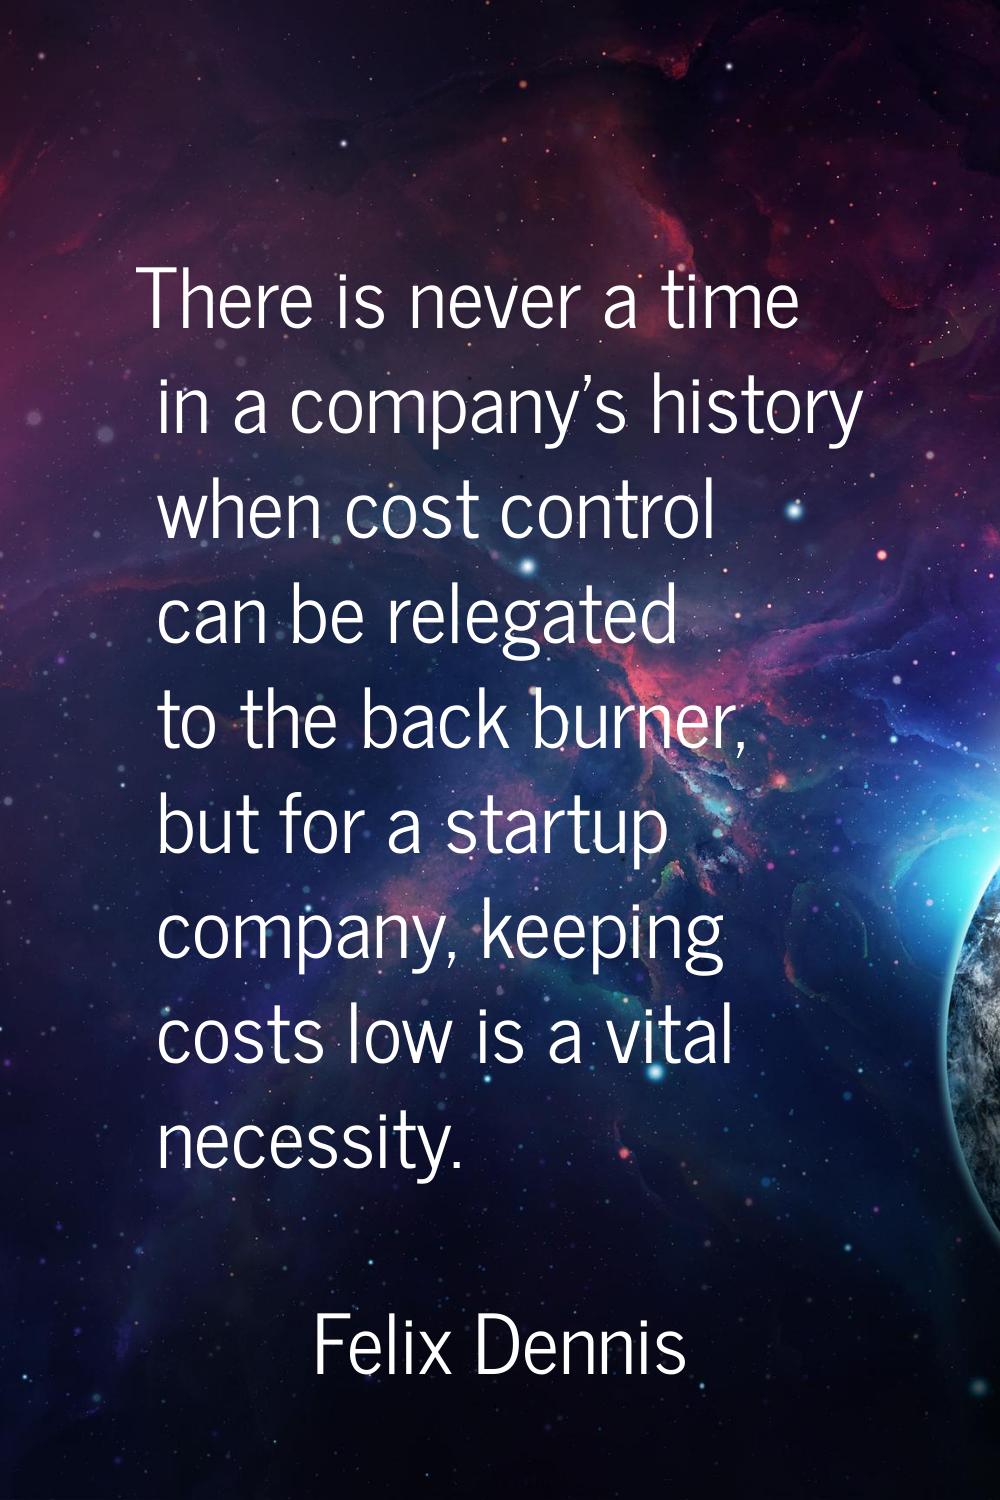 There is never a time in a company's history when cost control can be relegated to the back burner,